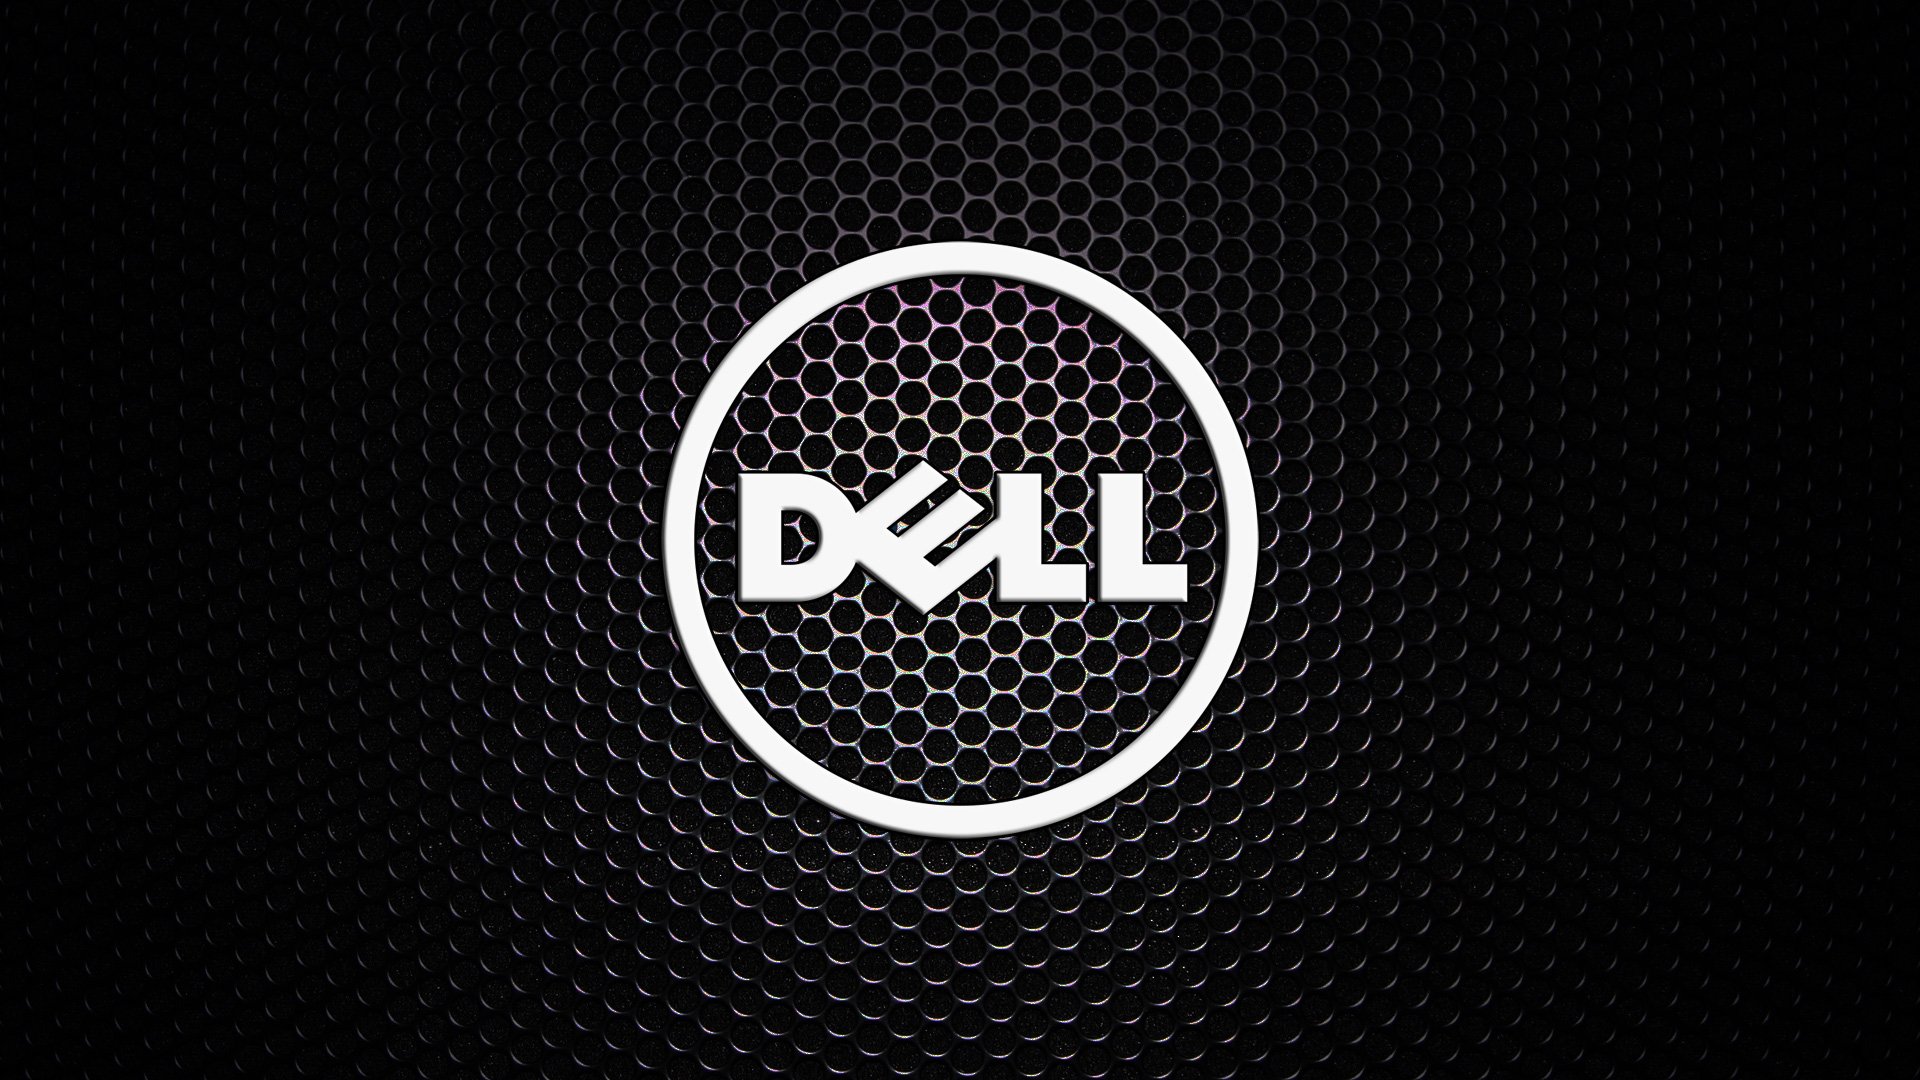 Dell is warning customers of a data breach after a threat actor claimed to have stolen information for approximately 49 million customers. The co